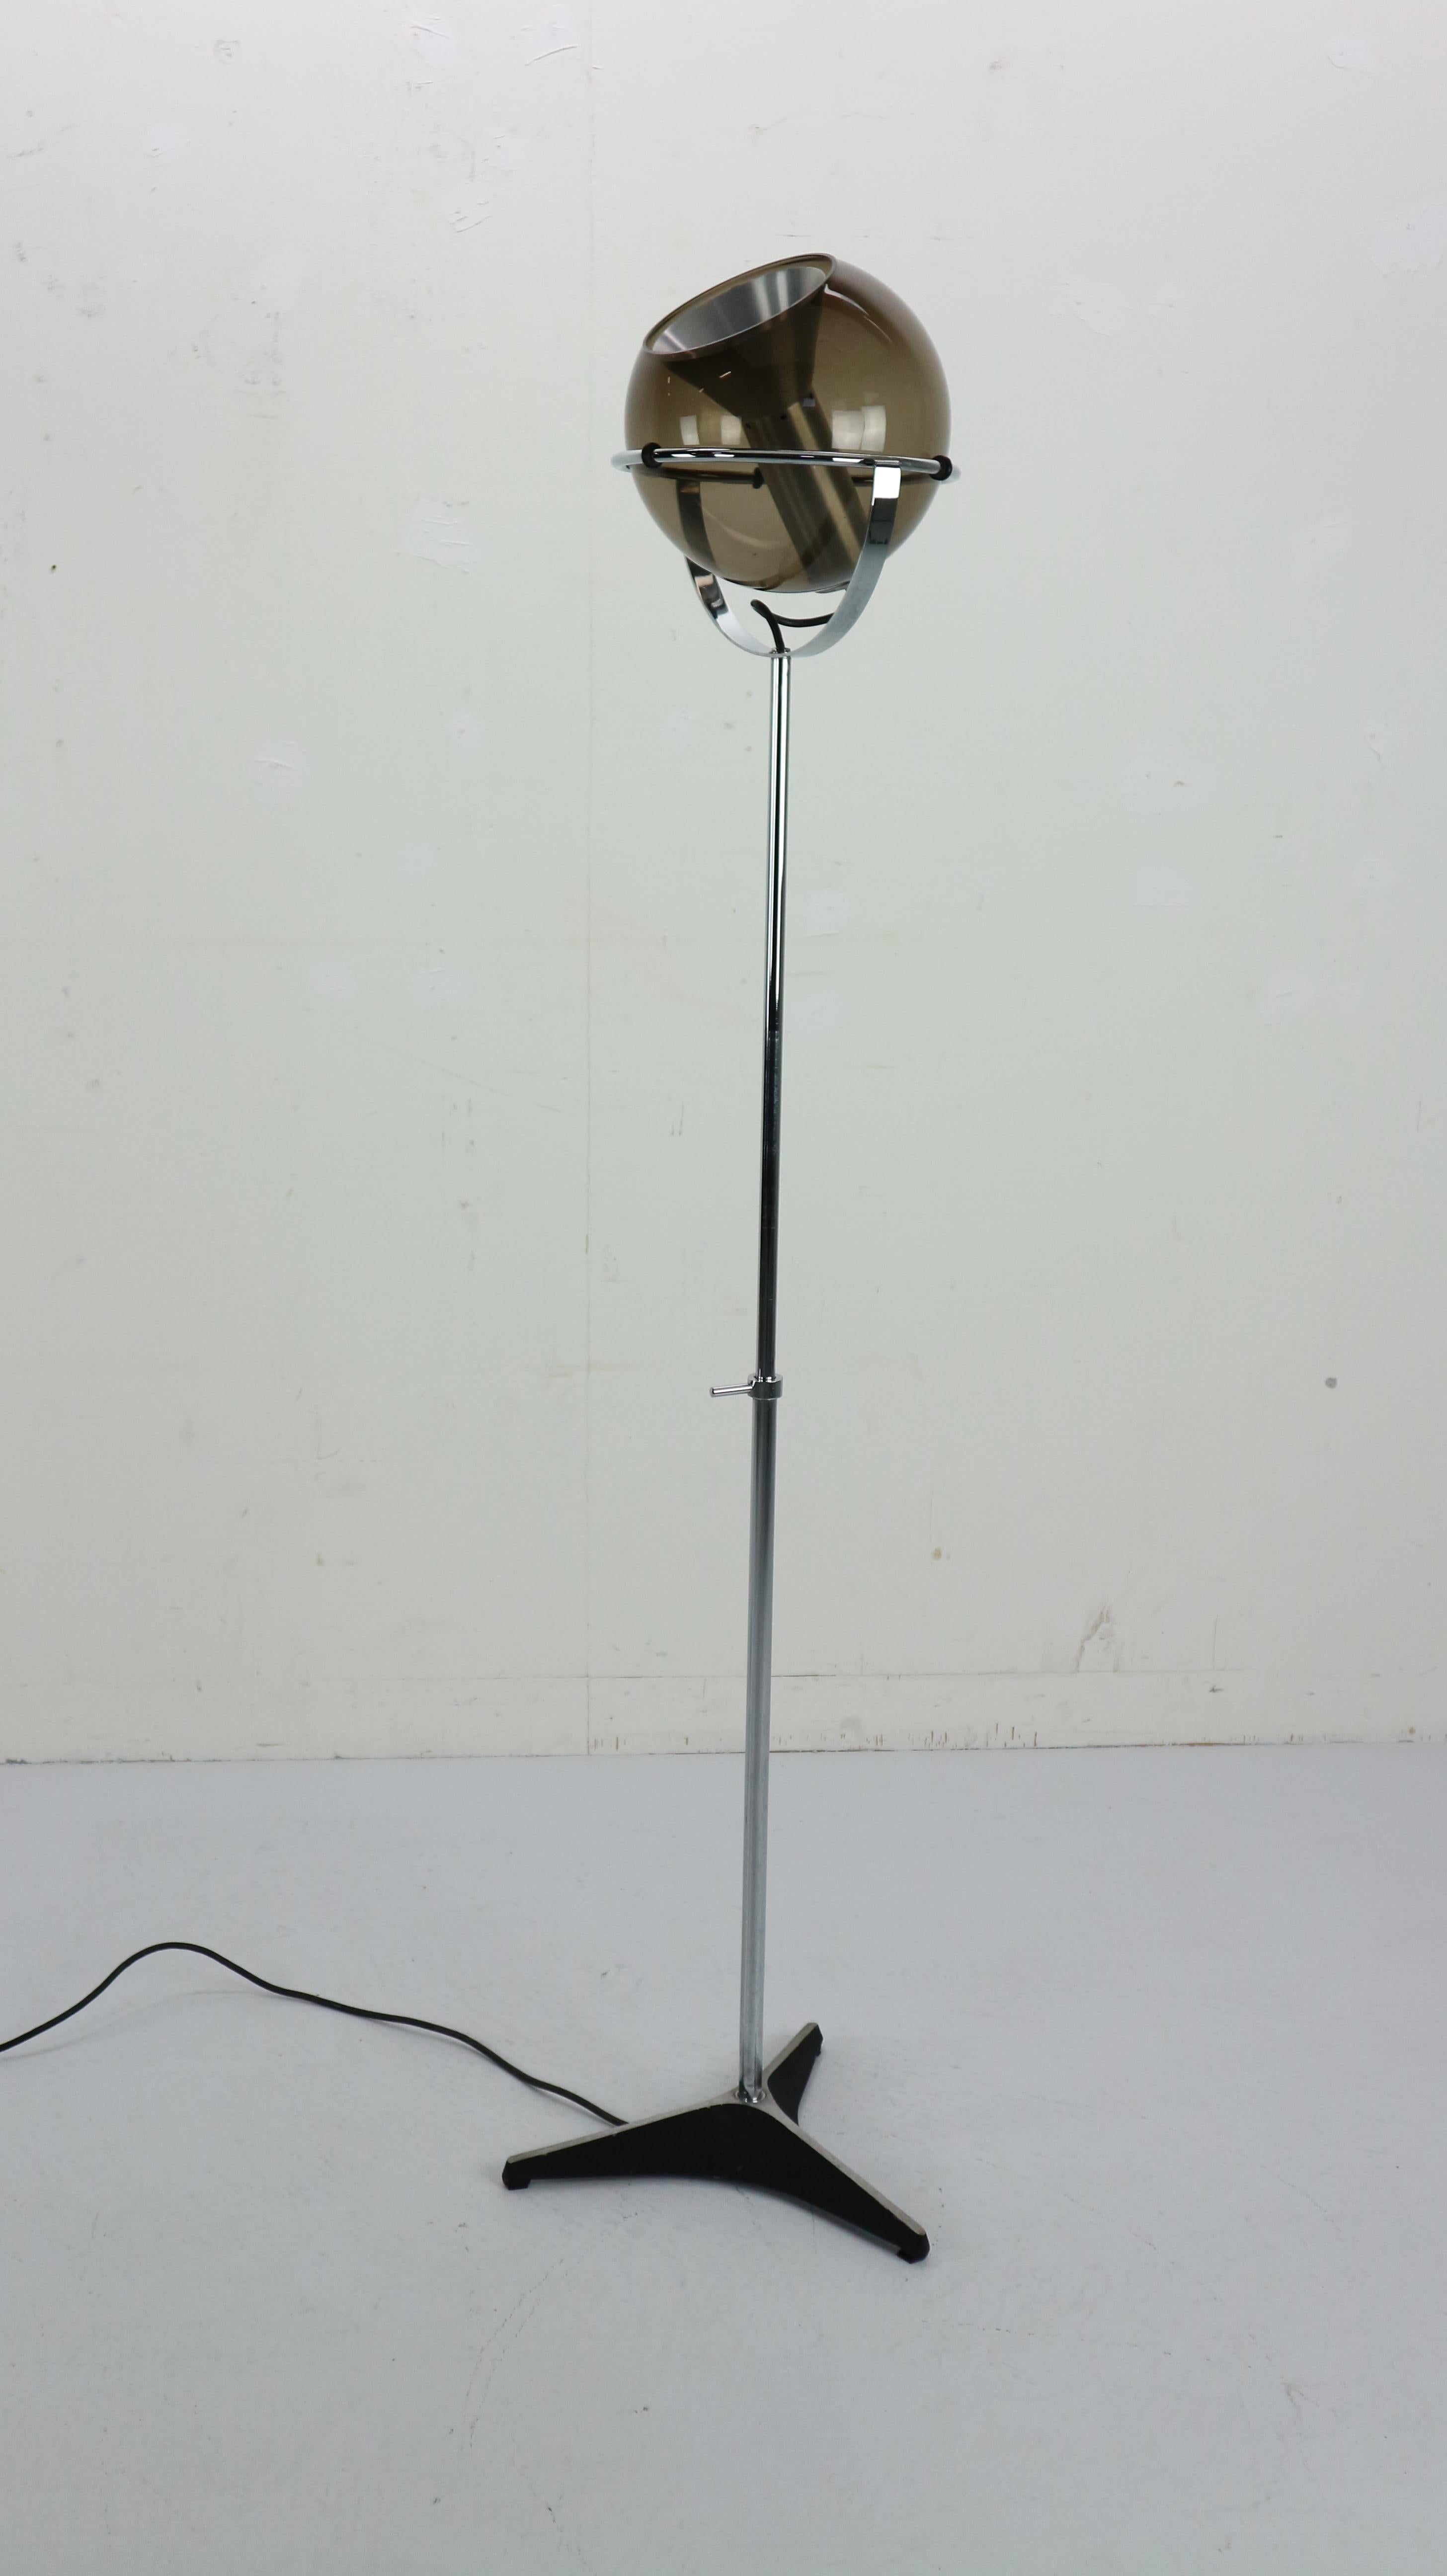 Globe floor lamp by Frank Ligtelijn for RAAK, designed in 1960s Netherlands. Smoked glass globe on an adjustable chrome stand. Original 3 star iron base and foot switch with original wiring.
Floating smoked glass globe rotates in almost any